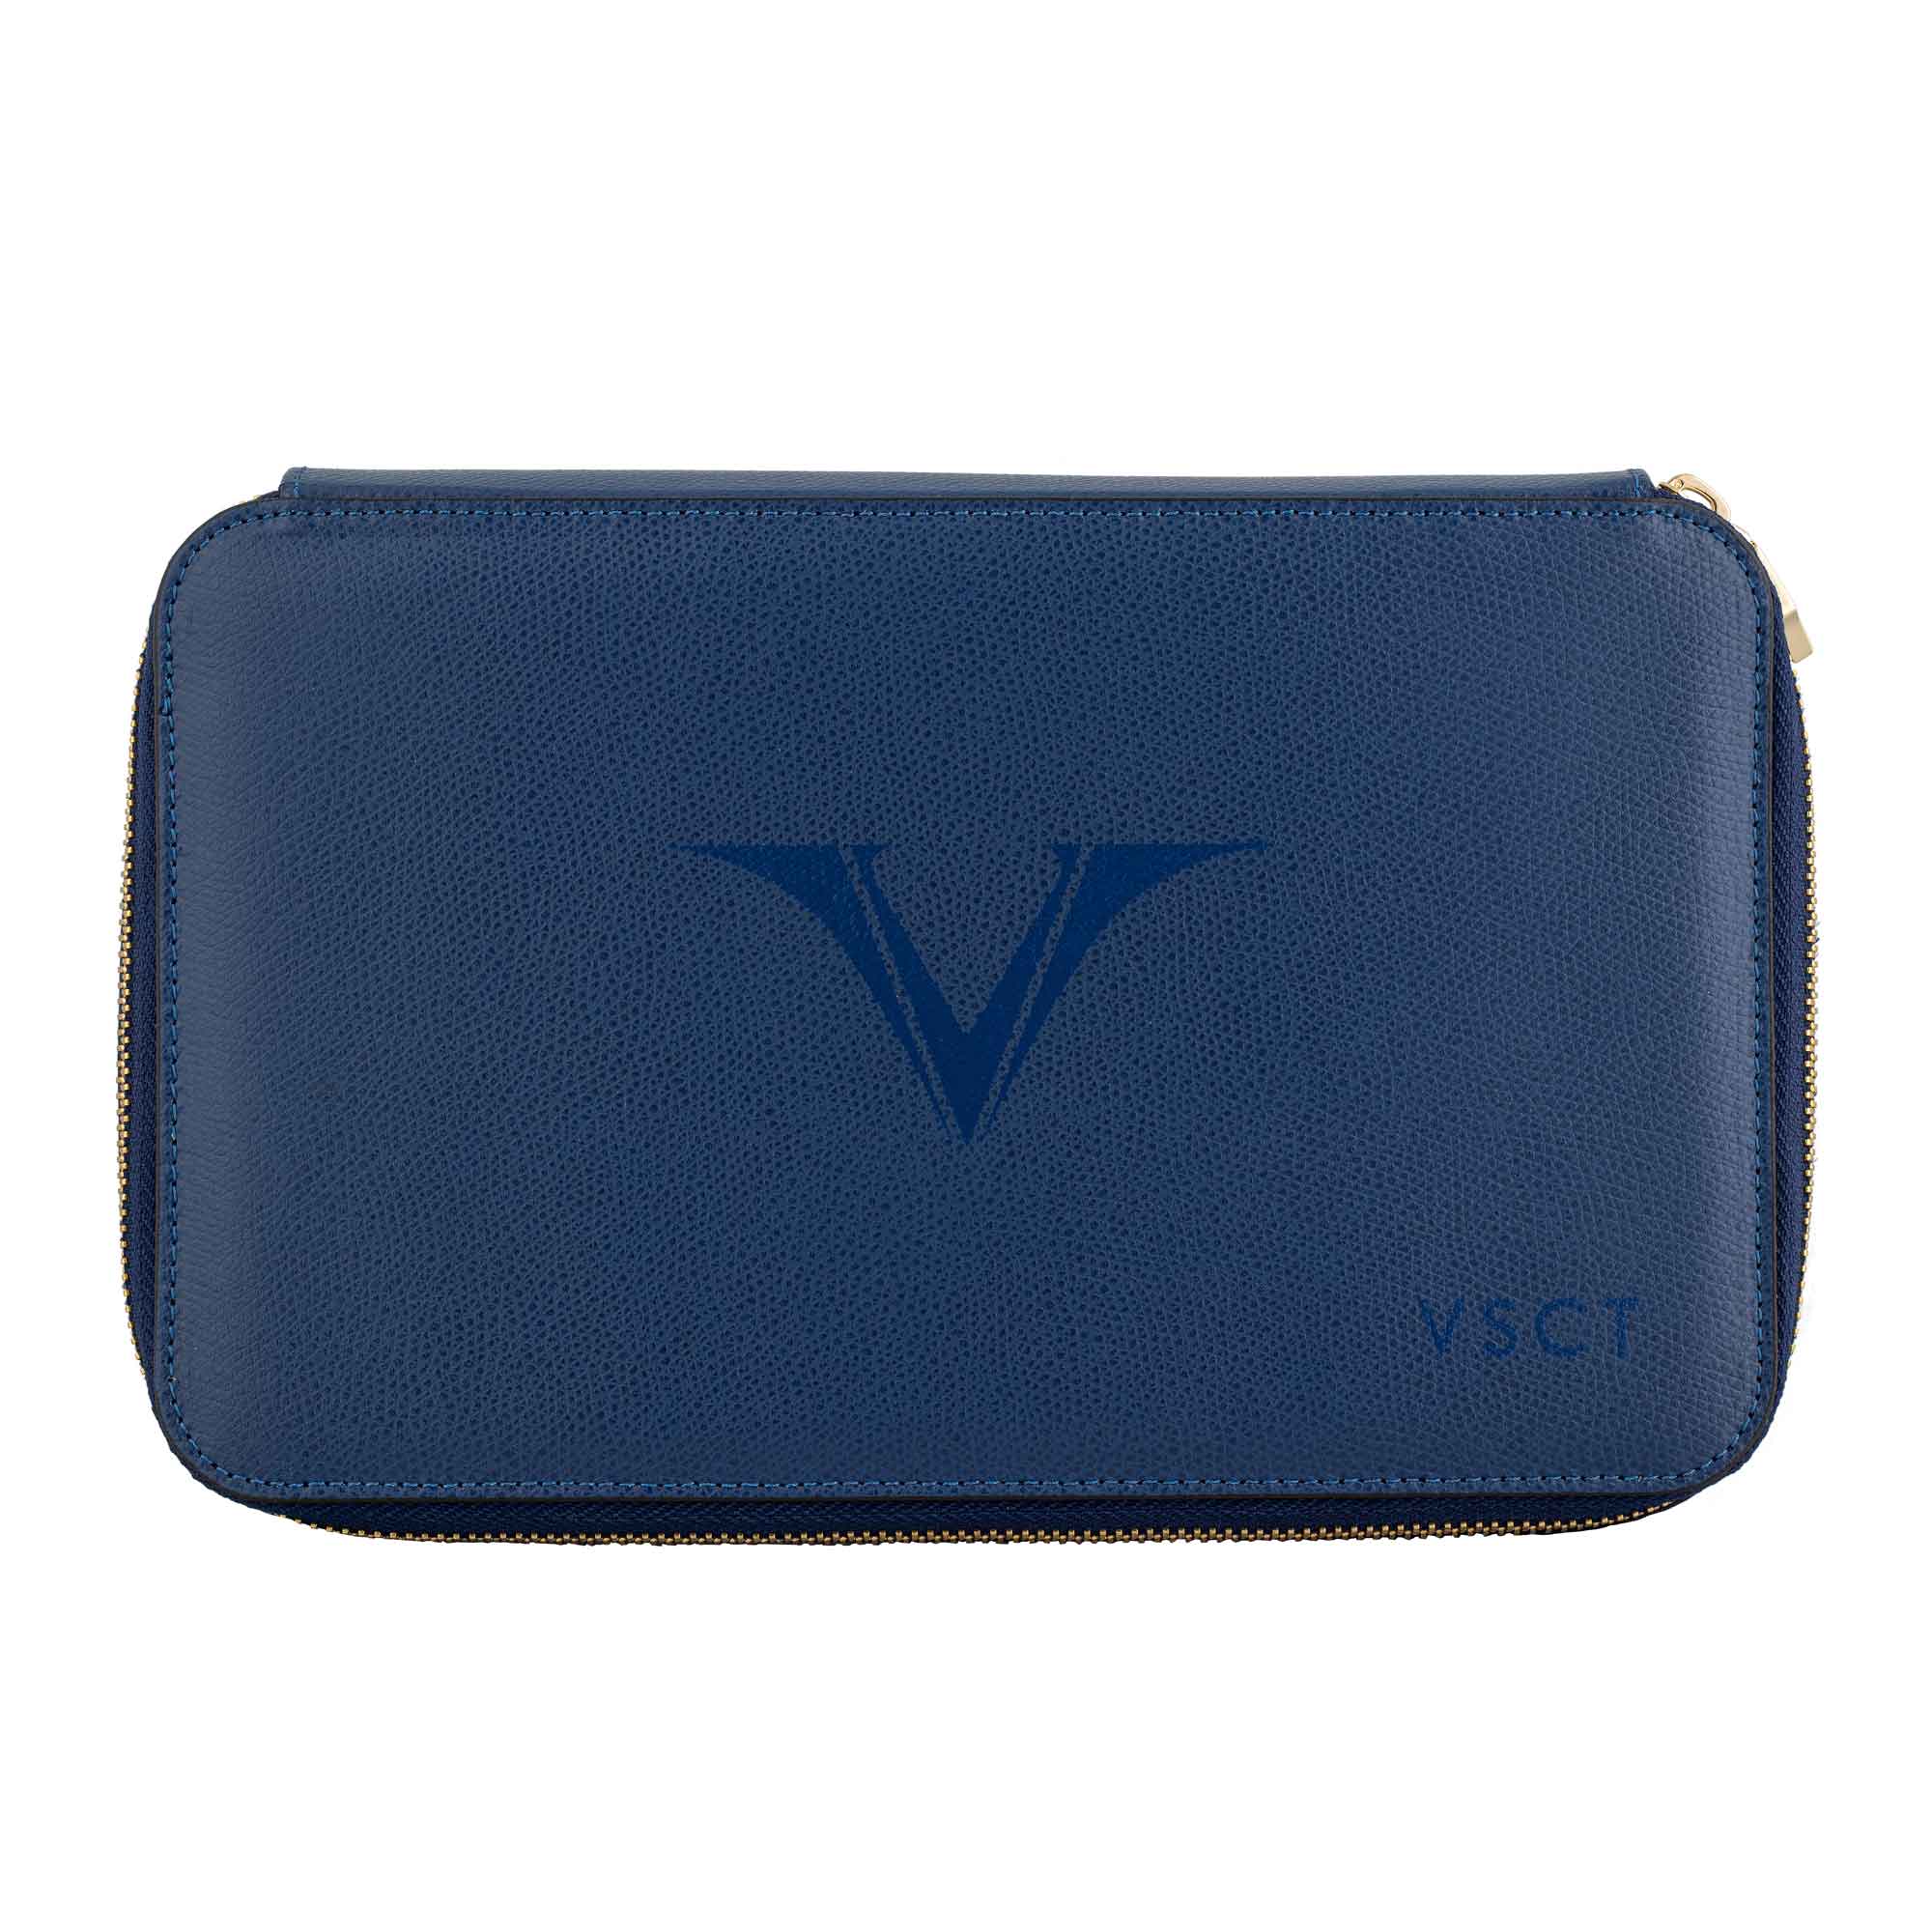 Visconti VSCT Leather Collection – 4 Pen Zippered Case – The Nibsmith